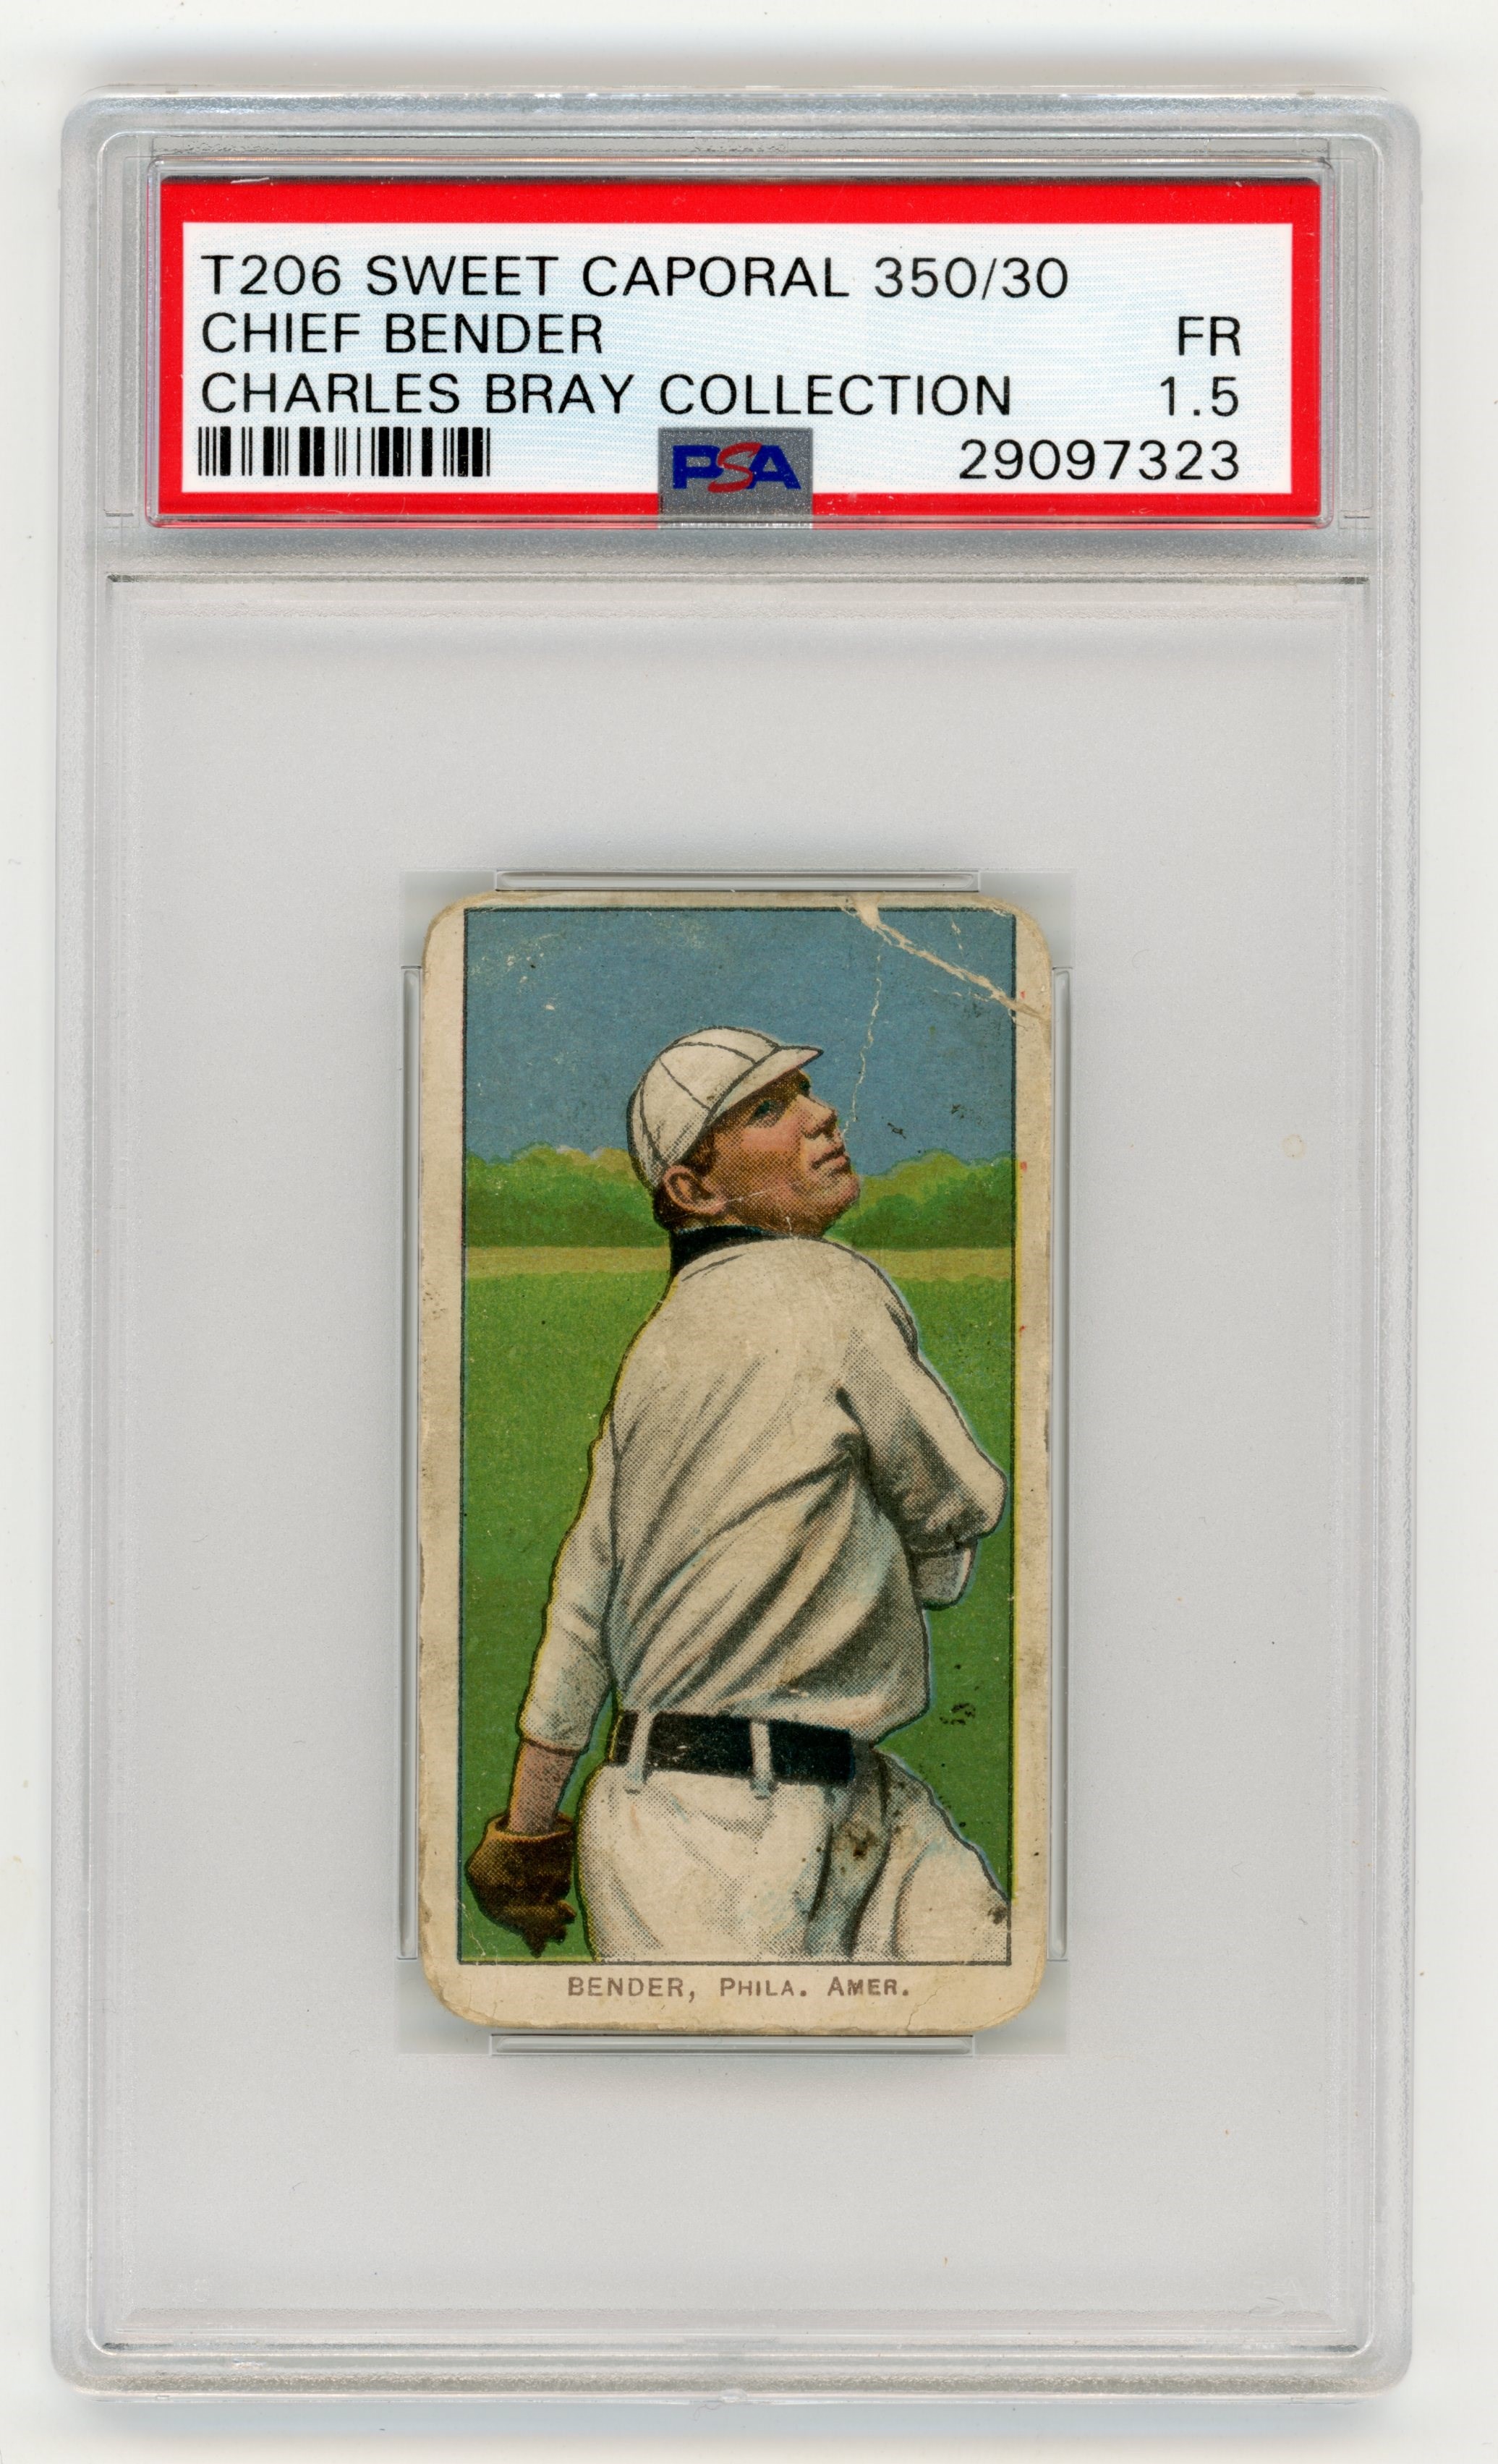 T206 Sweet Caporal 350/30 Chief Bender PSA 1.5 From Charles Bray Collection